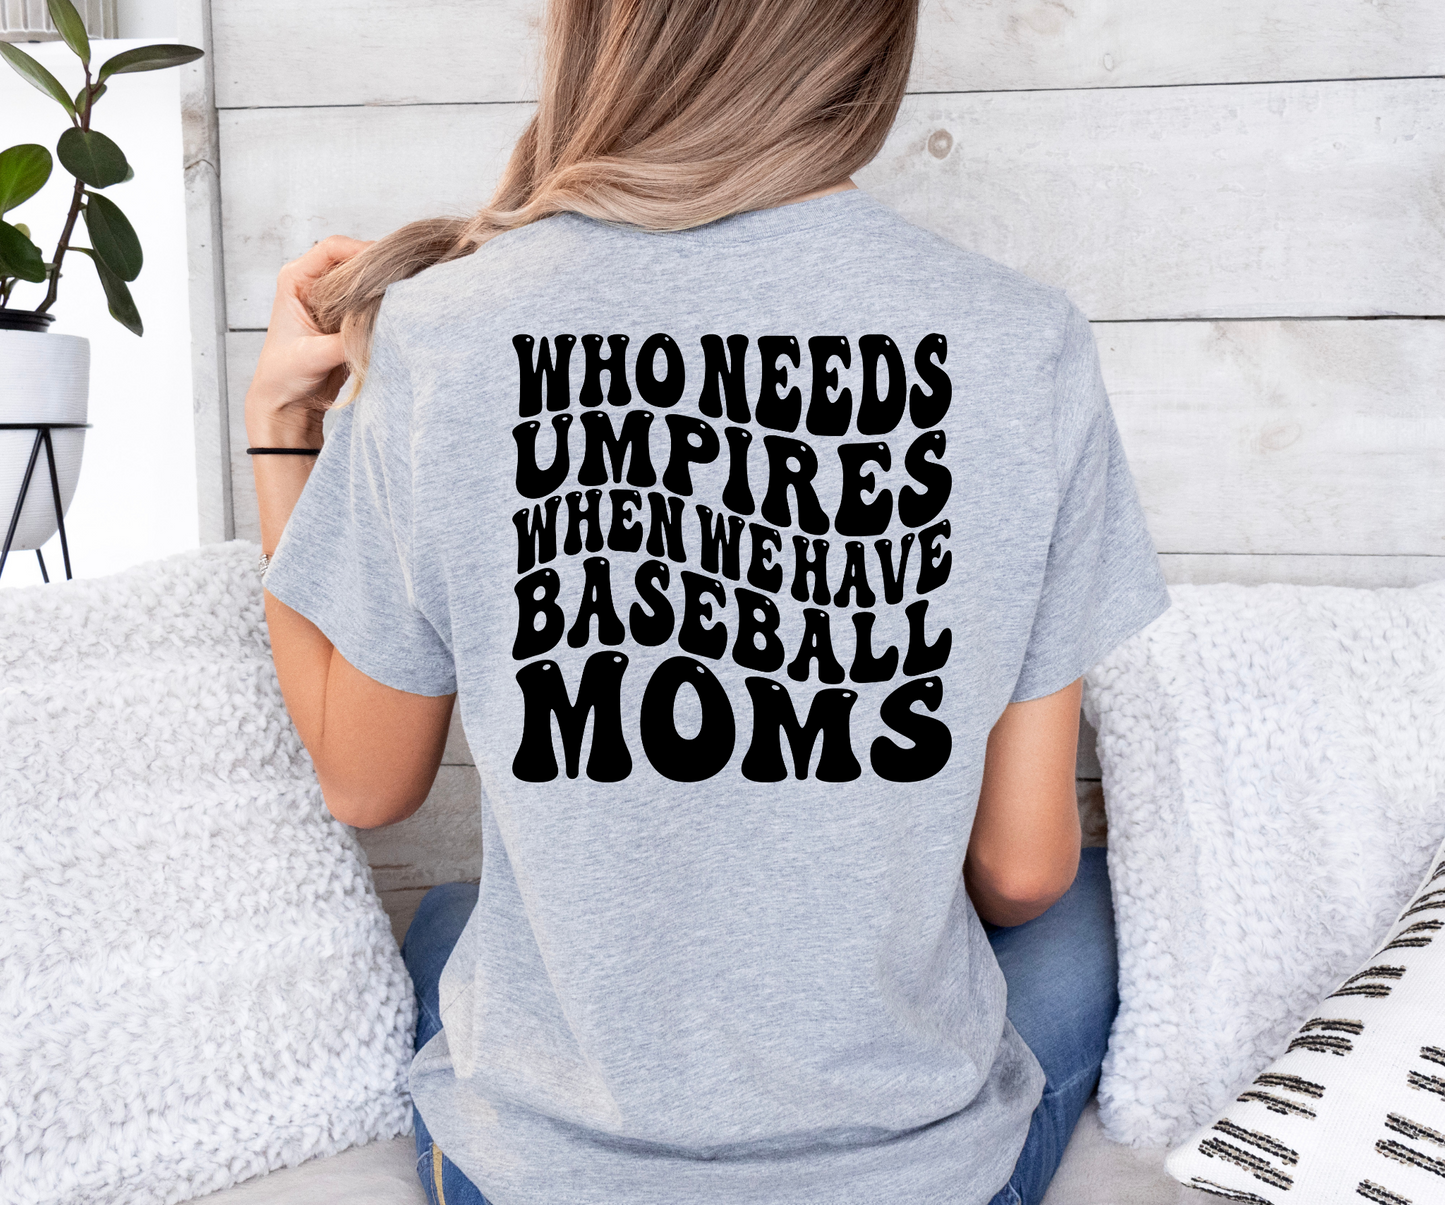 Who needs umpires when we have baseball moms